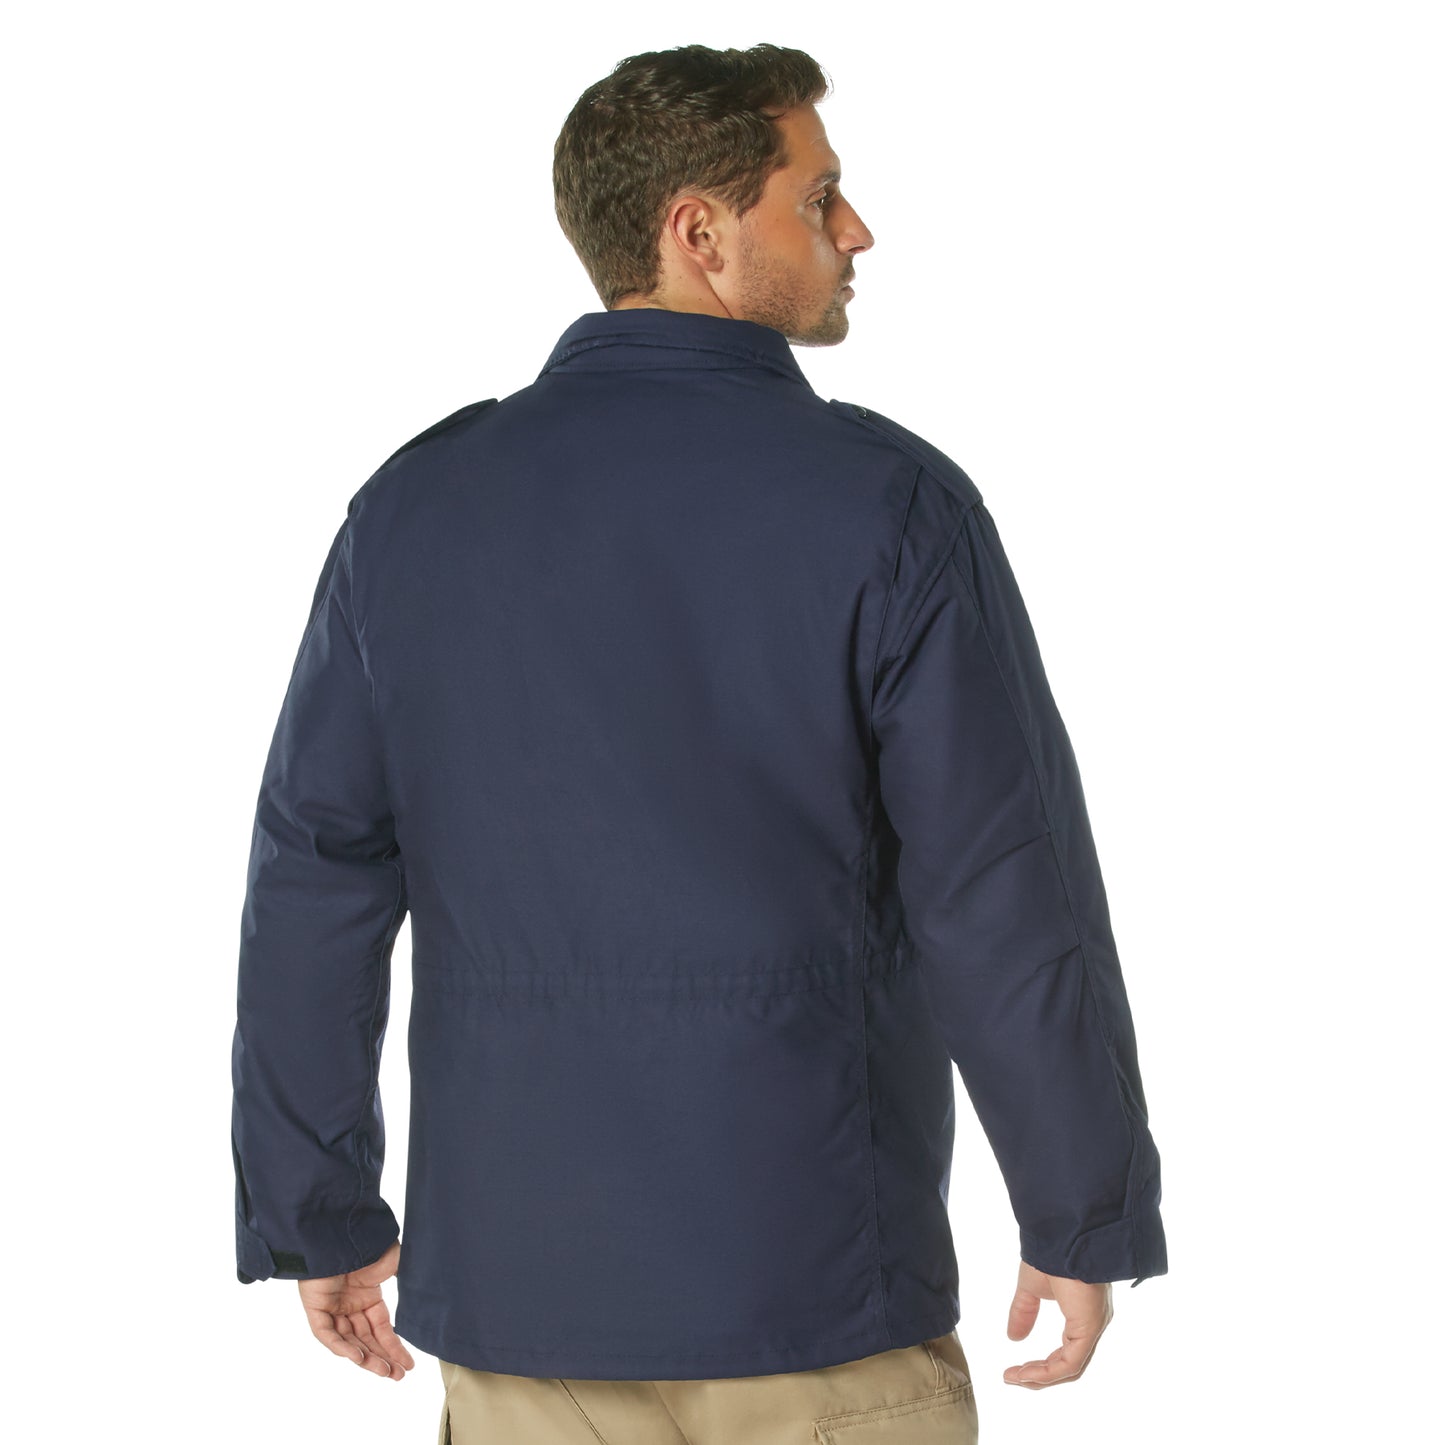 Rothco M-65 Field Jacket With Liner - Navy Blue